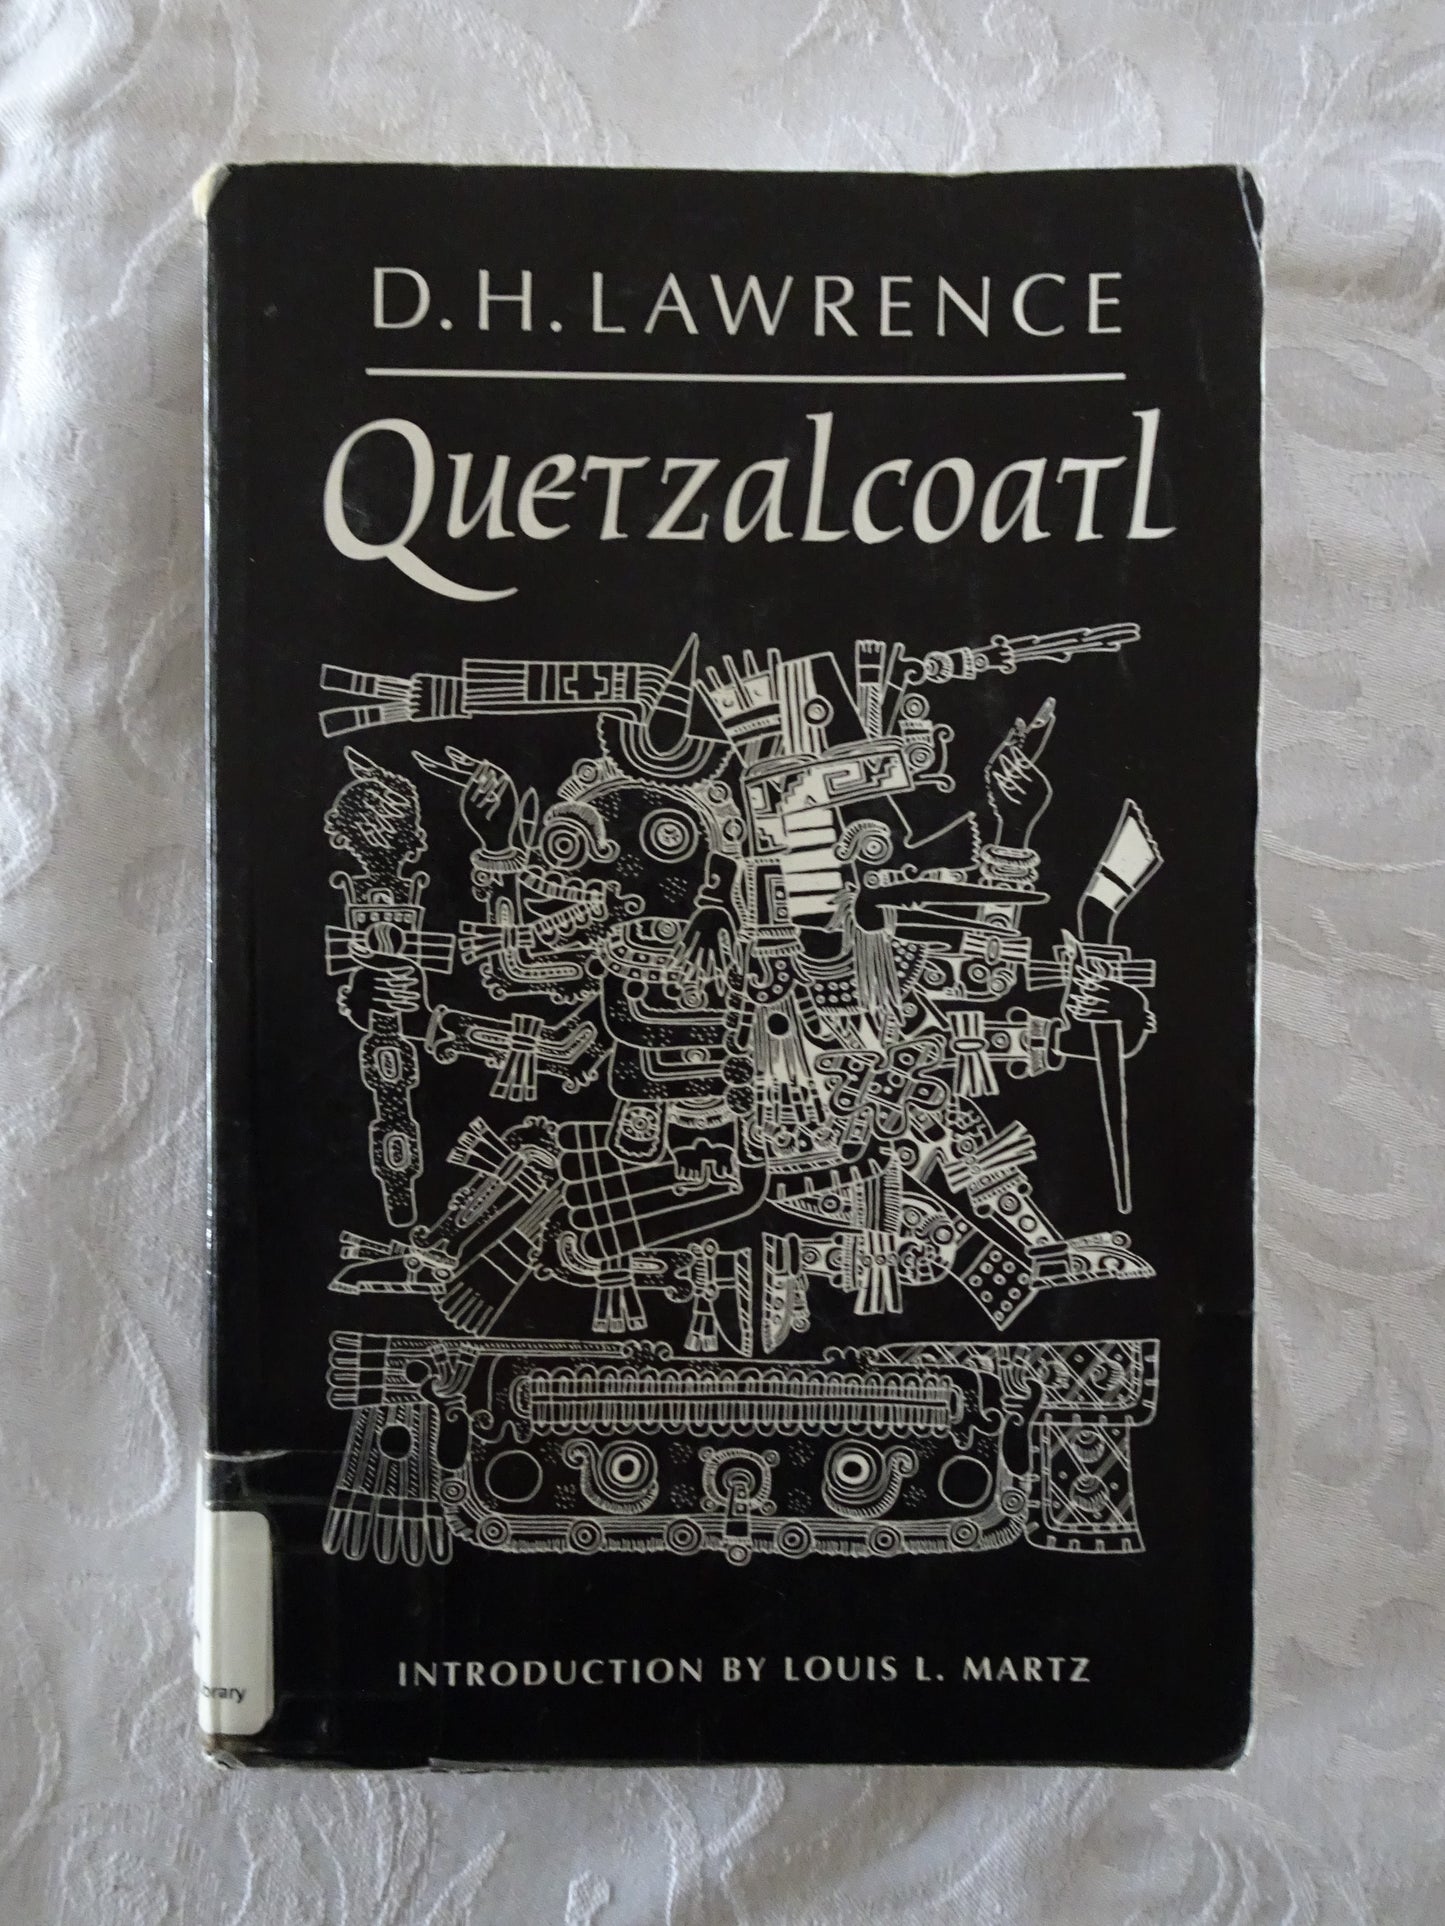 Quetzalcoatl by D. H. Lawrence